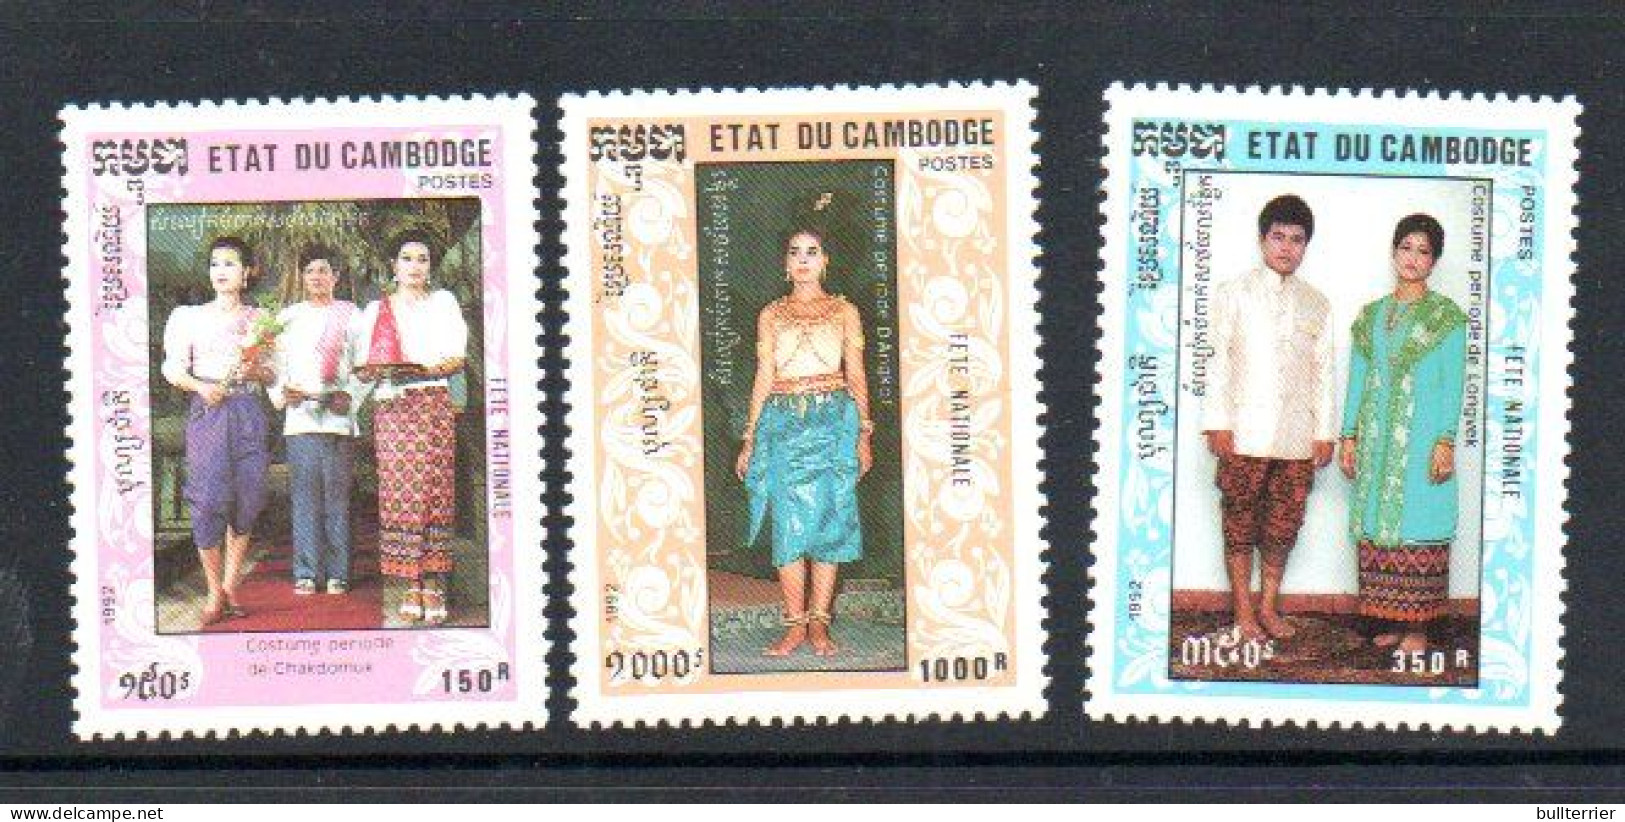 CAMBODIA - 1992- TRADITIONAL COSTUMES SET OF 3  MINT NEVER HINGED - Cambodja